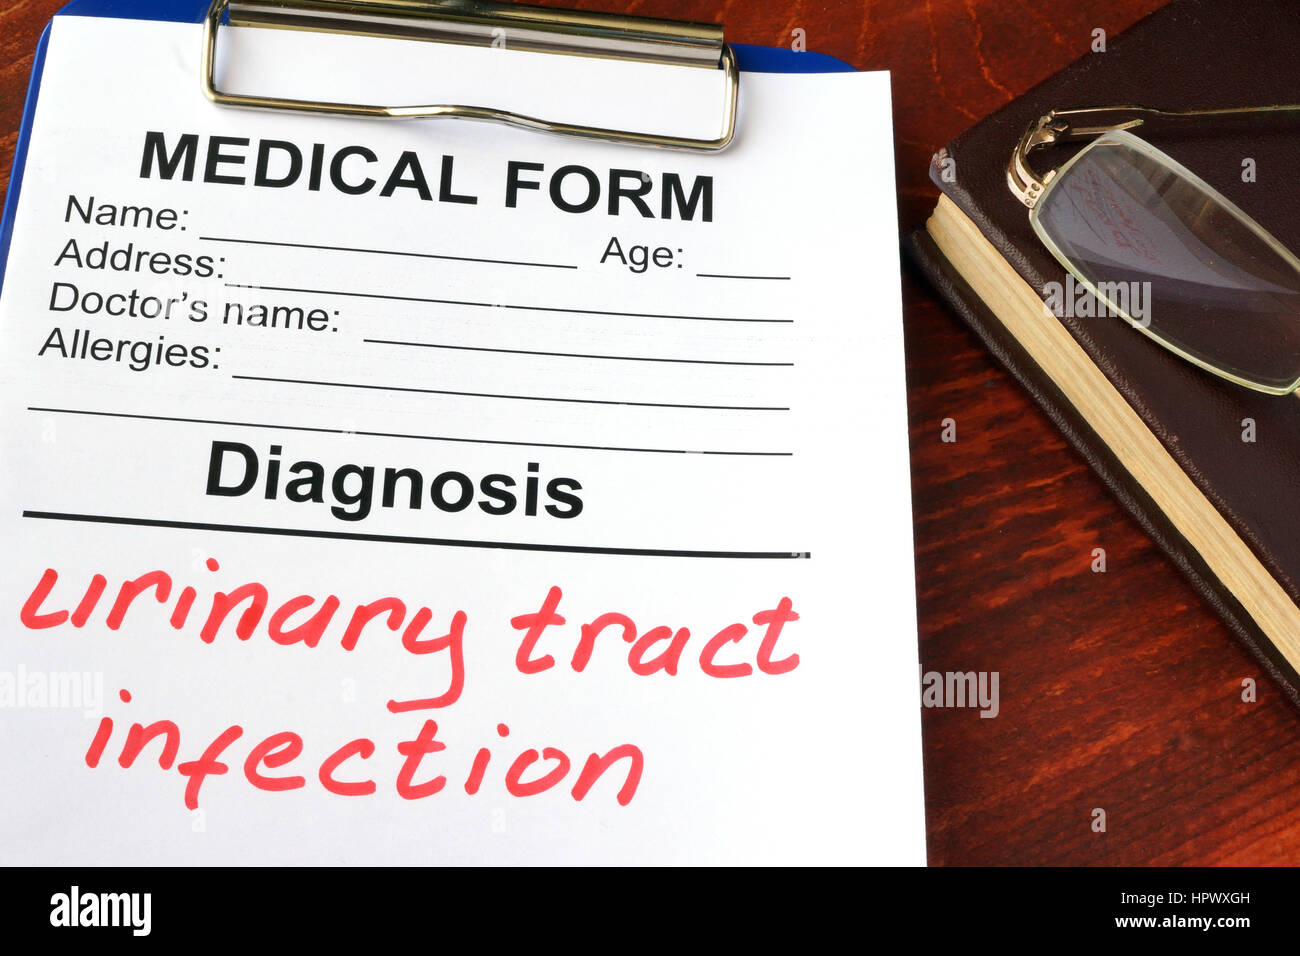 Medical form with diagnosis Urinary tract infection. Stock Photo